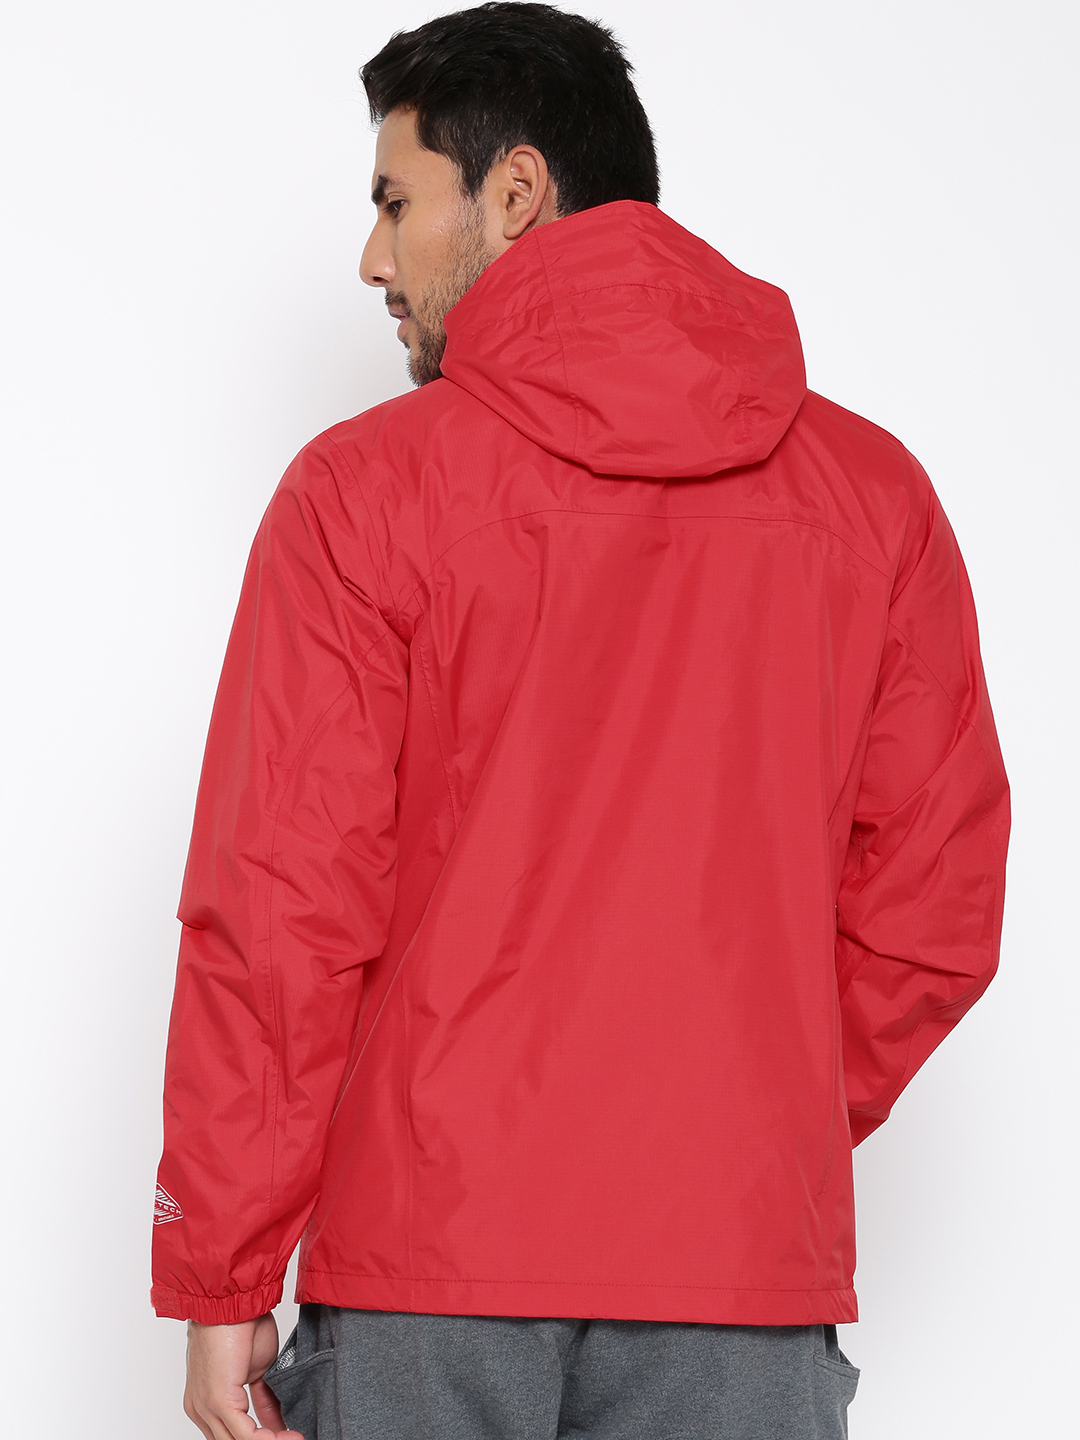 Buy Columbia Red Pouring Adventure Manchester United F.C. Rain